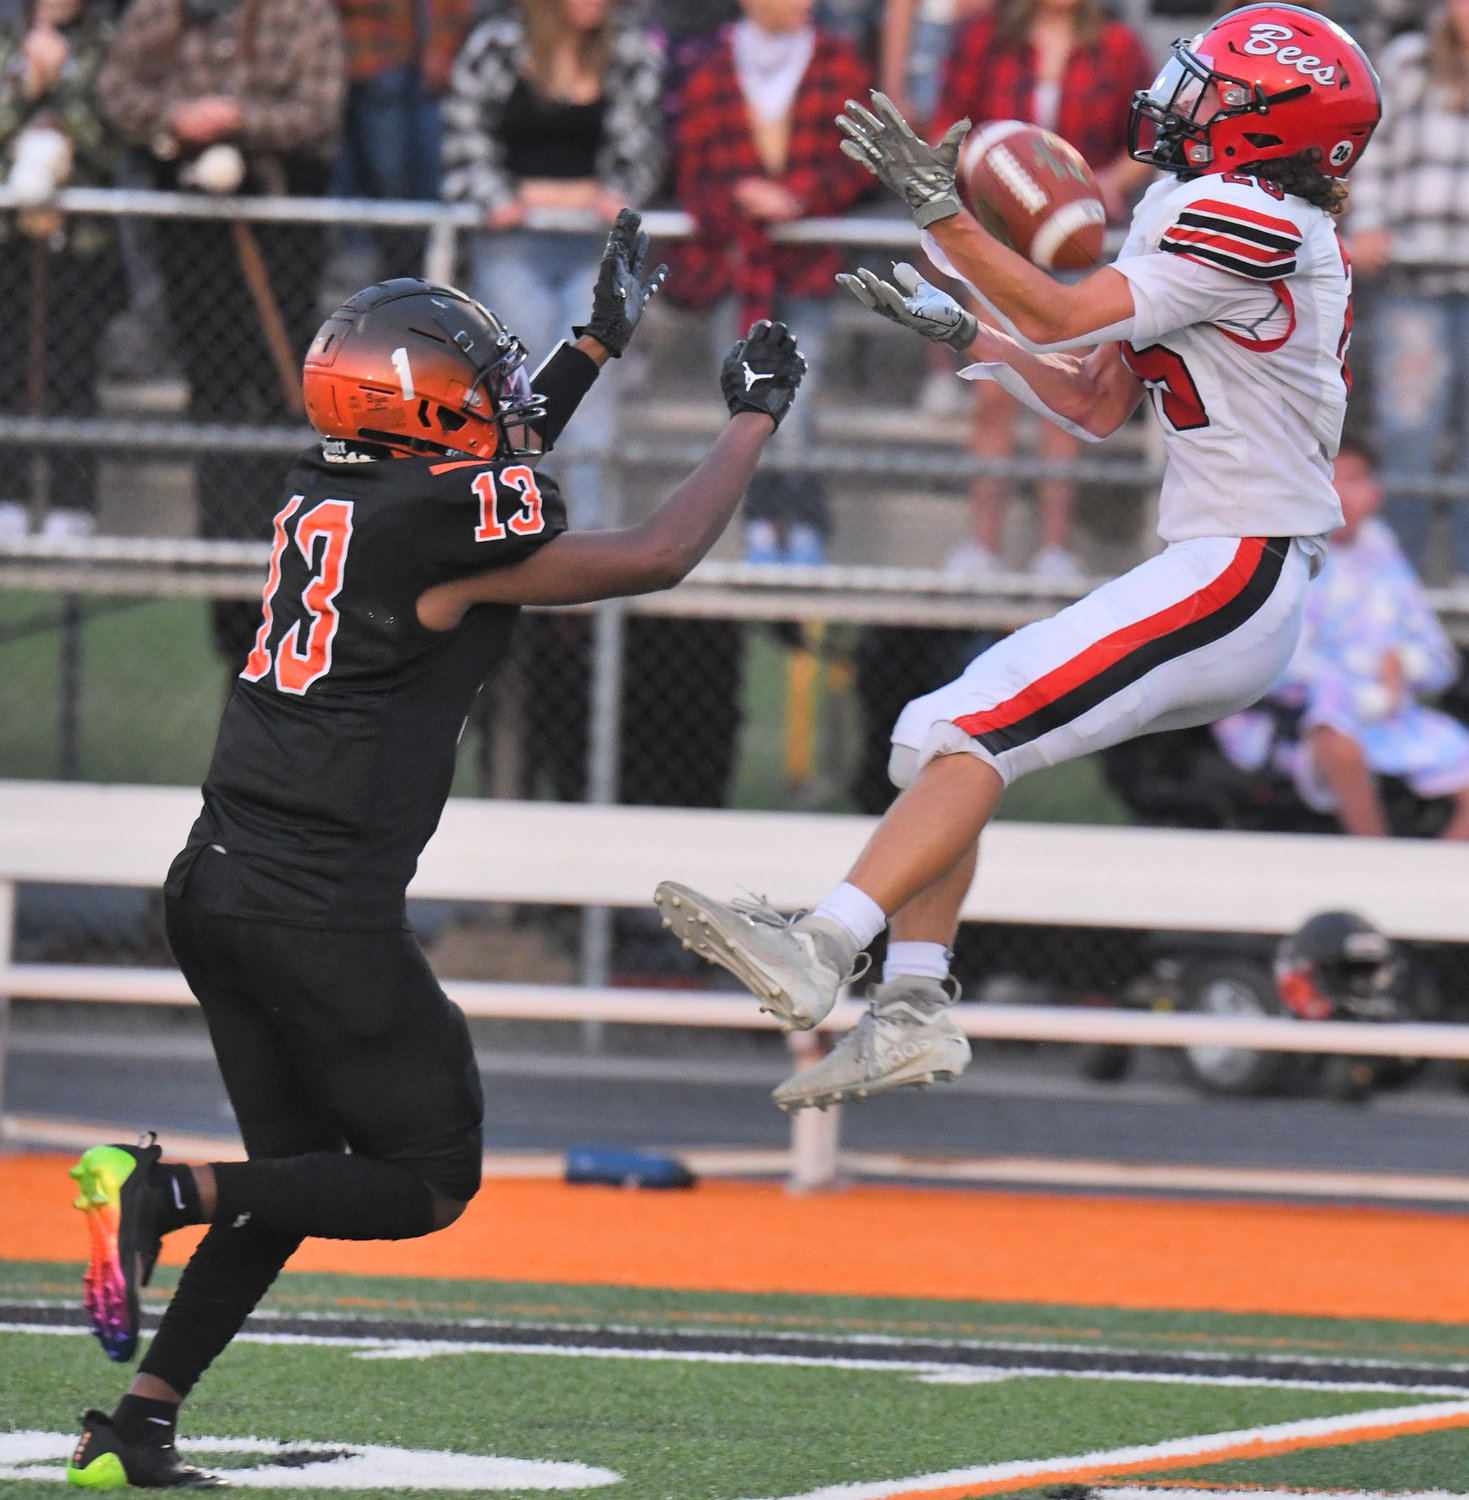 Kaleb Paul of Baldwinsville makes a catch over Rome Free Academy defender Austin DeJean in the second quarter Friday night at RFA Stadium. The Bees rarely passed, running almost every play in their 55-13 win.